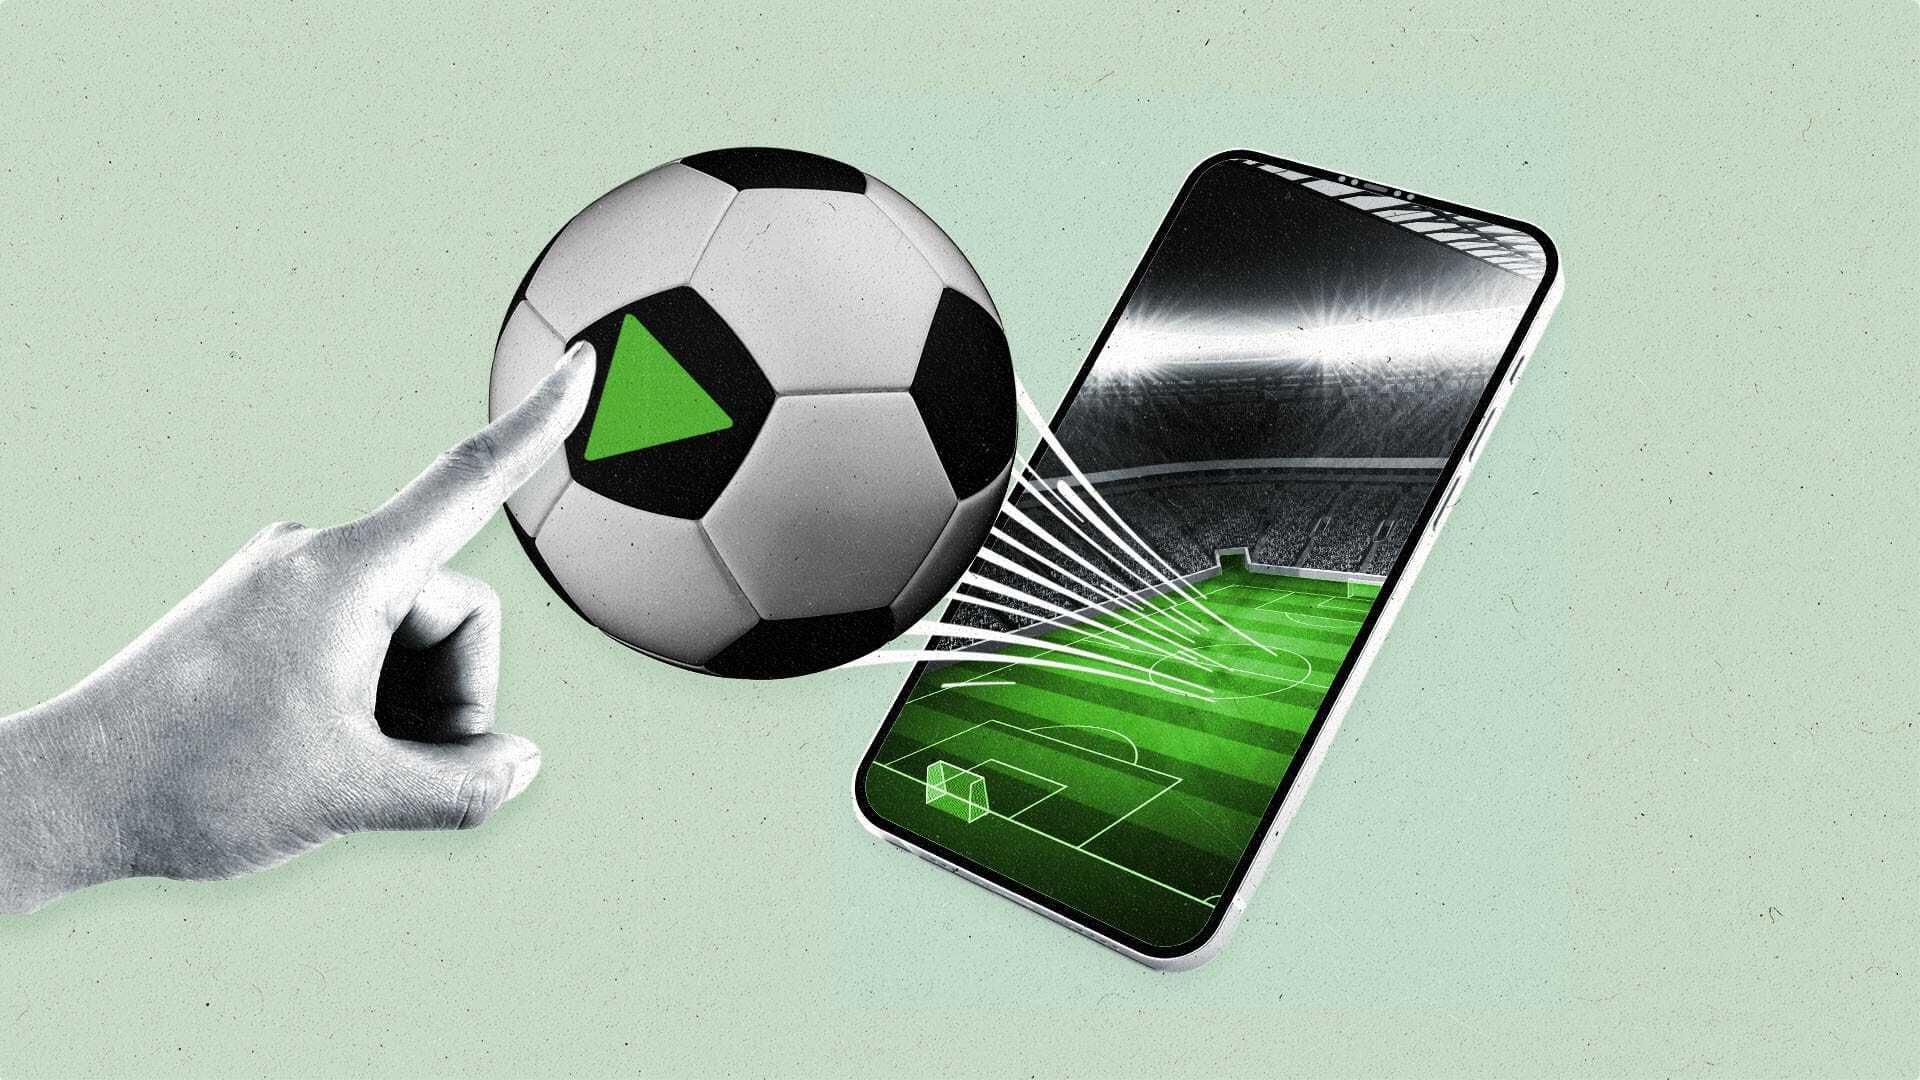 A hand touches a play button on a soccer ball coming out of a smartphone screen.